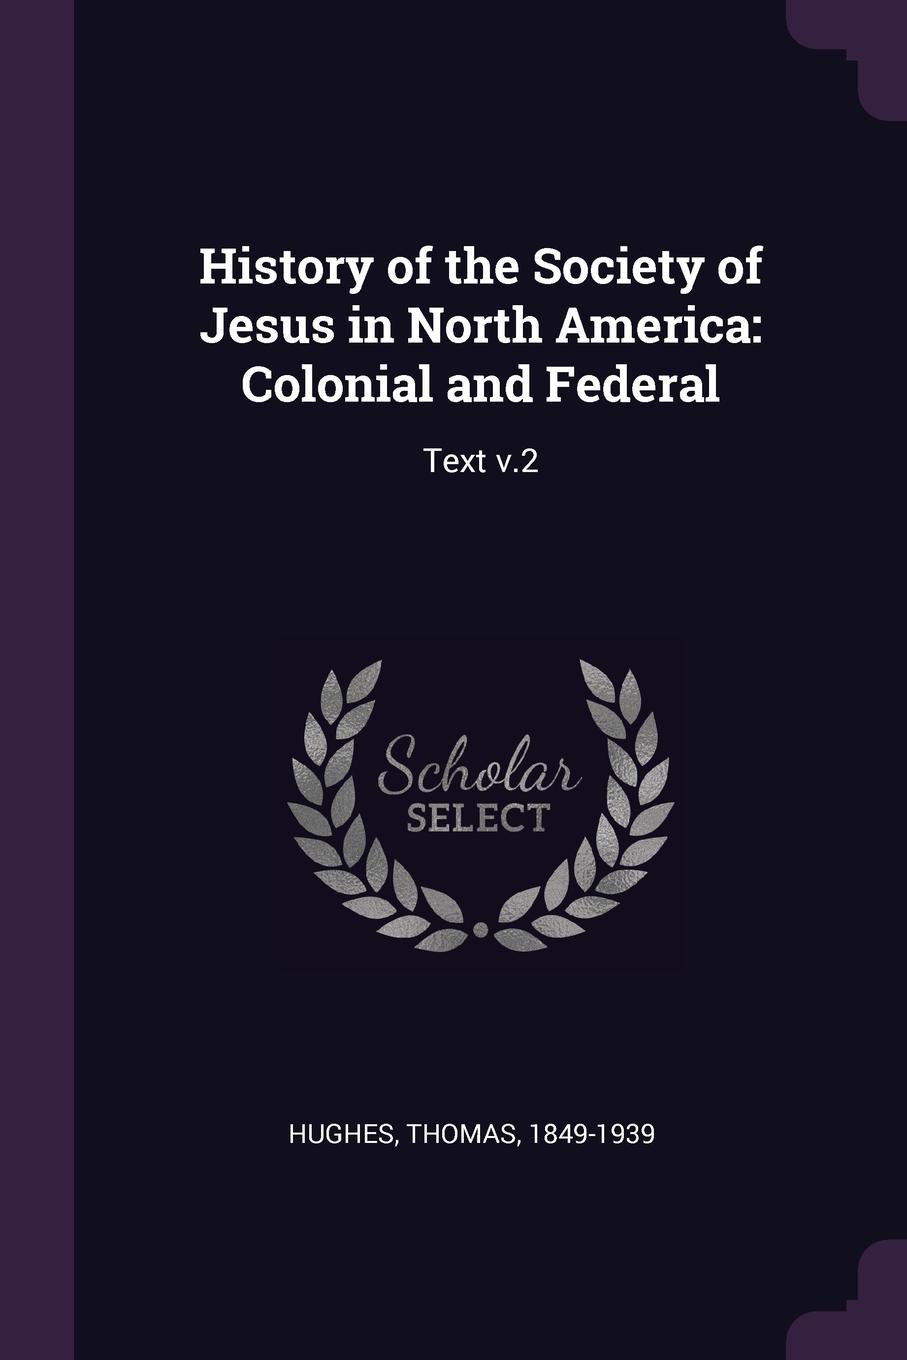 History of the Society of Jesus in North America. Colonial and Federal: Text v.2